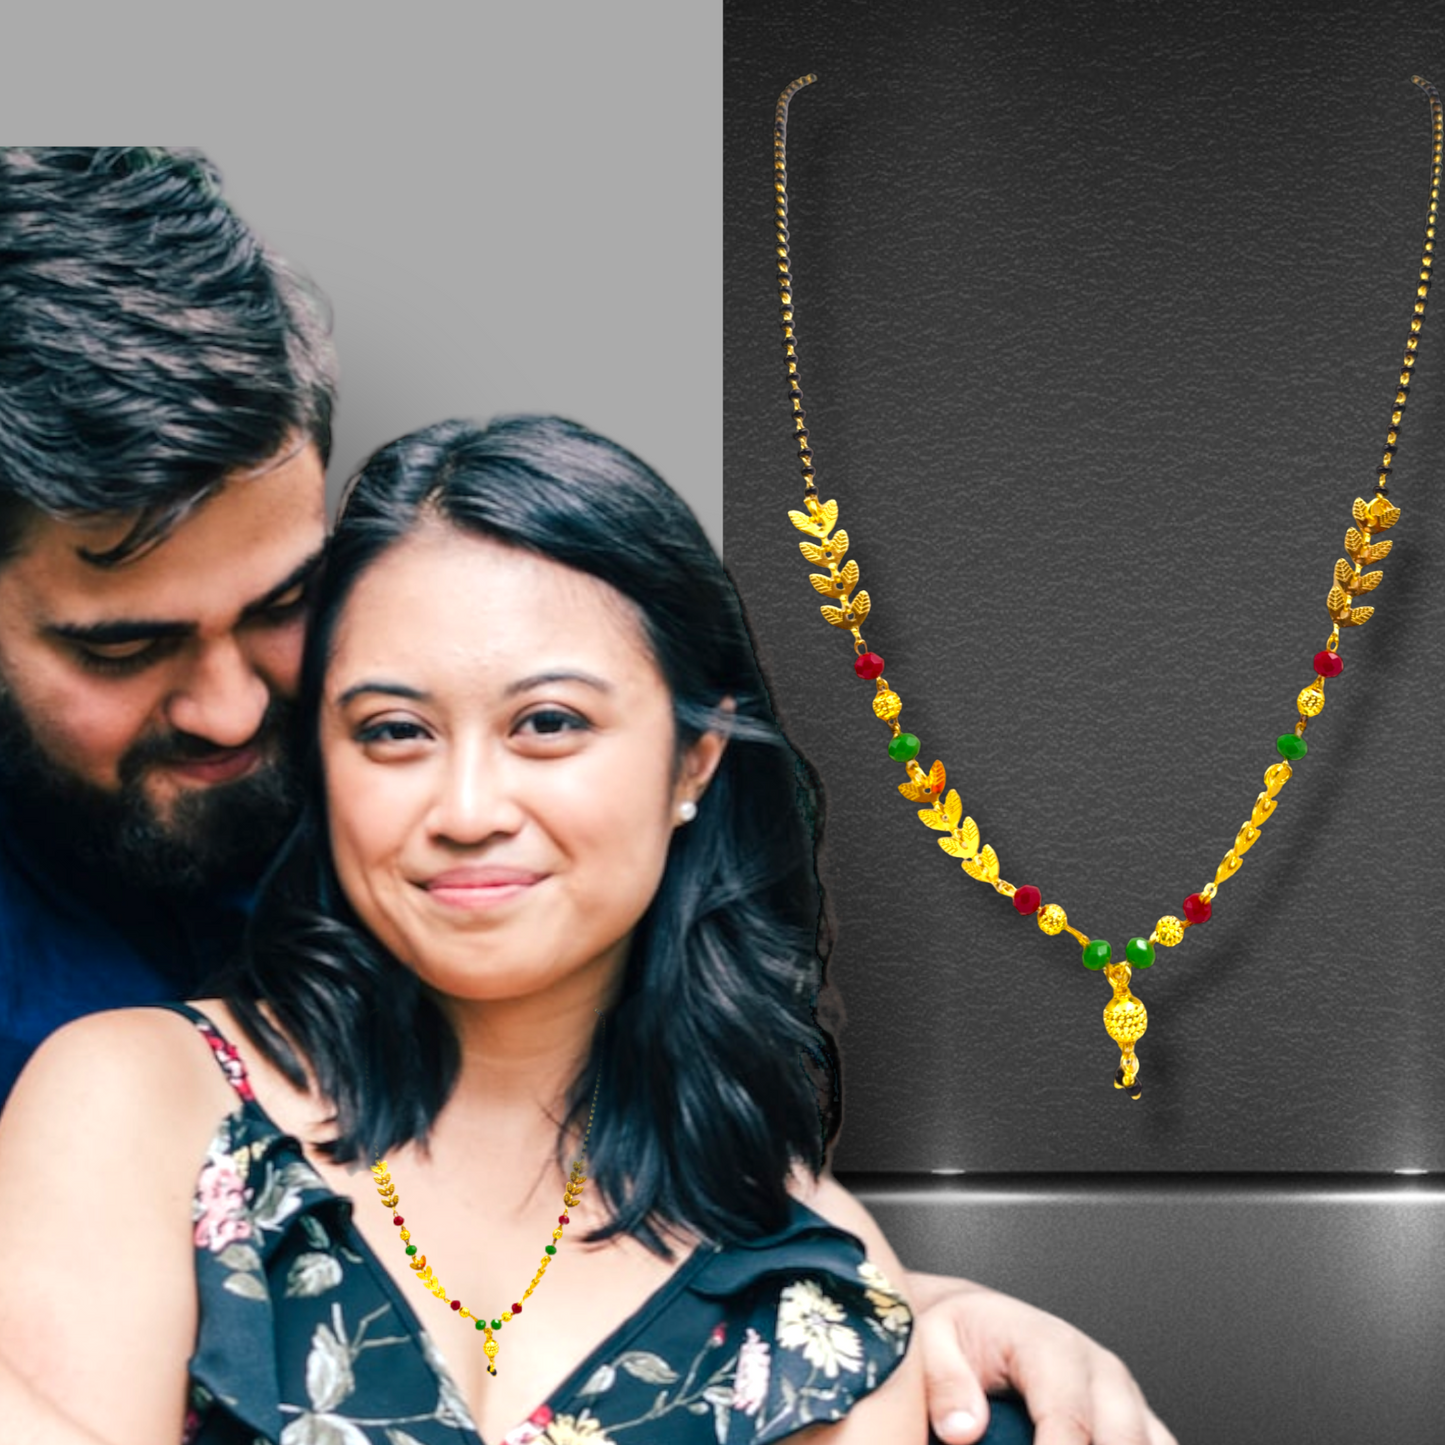 "Elegant Union: Gold-Plated Mangalsutra Adorned with Black Beads"